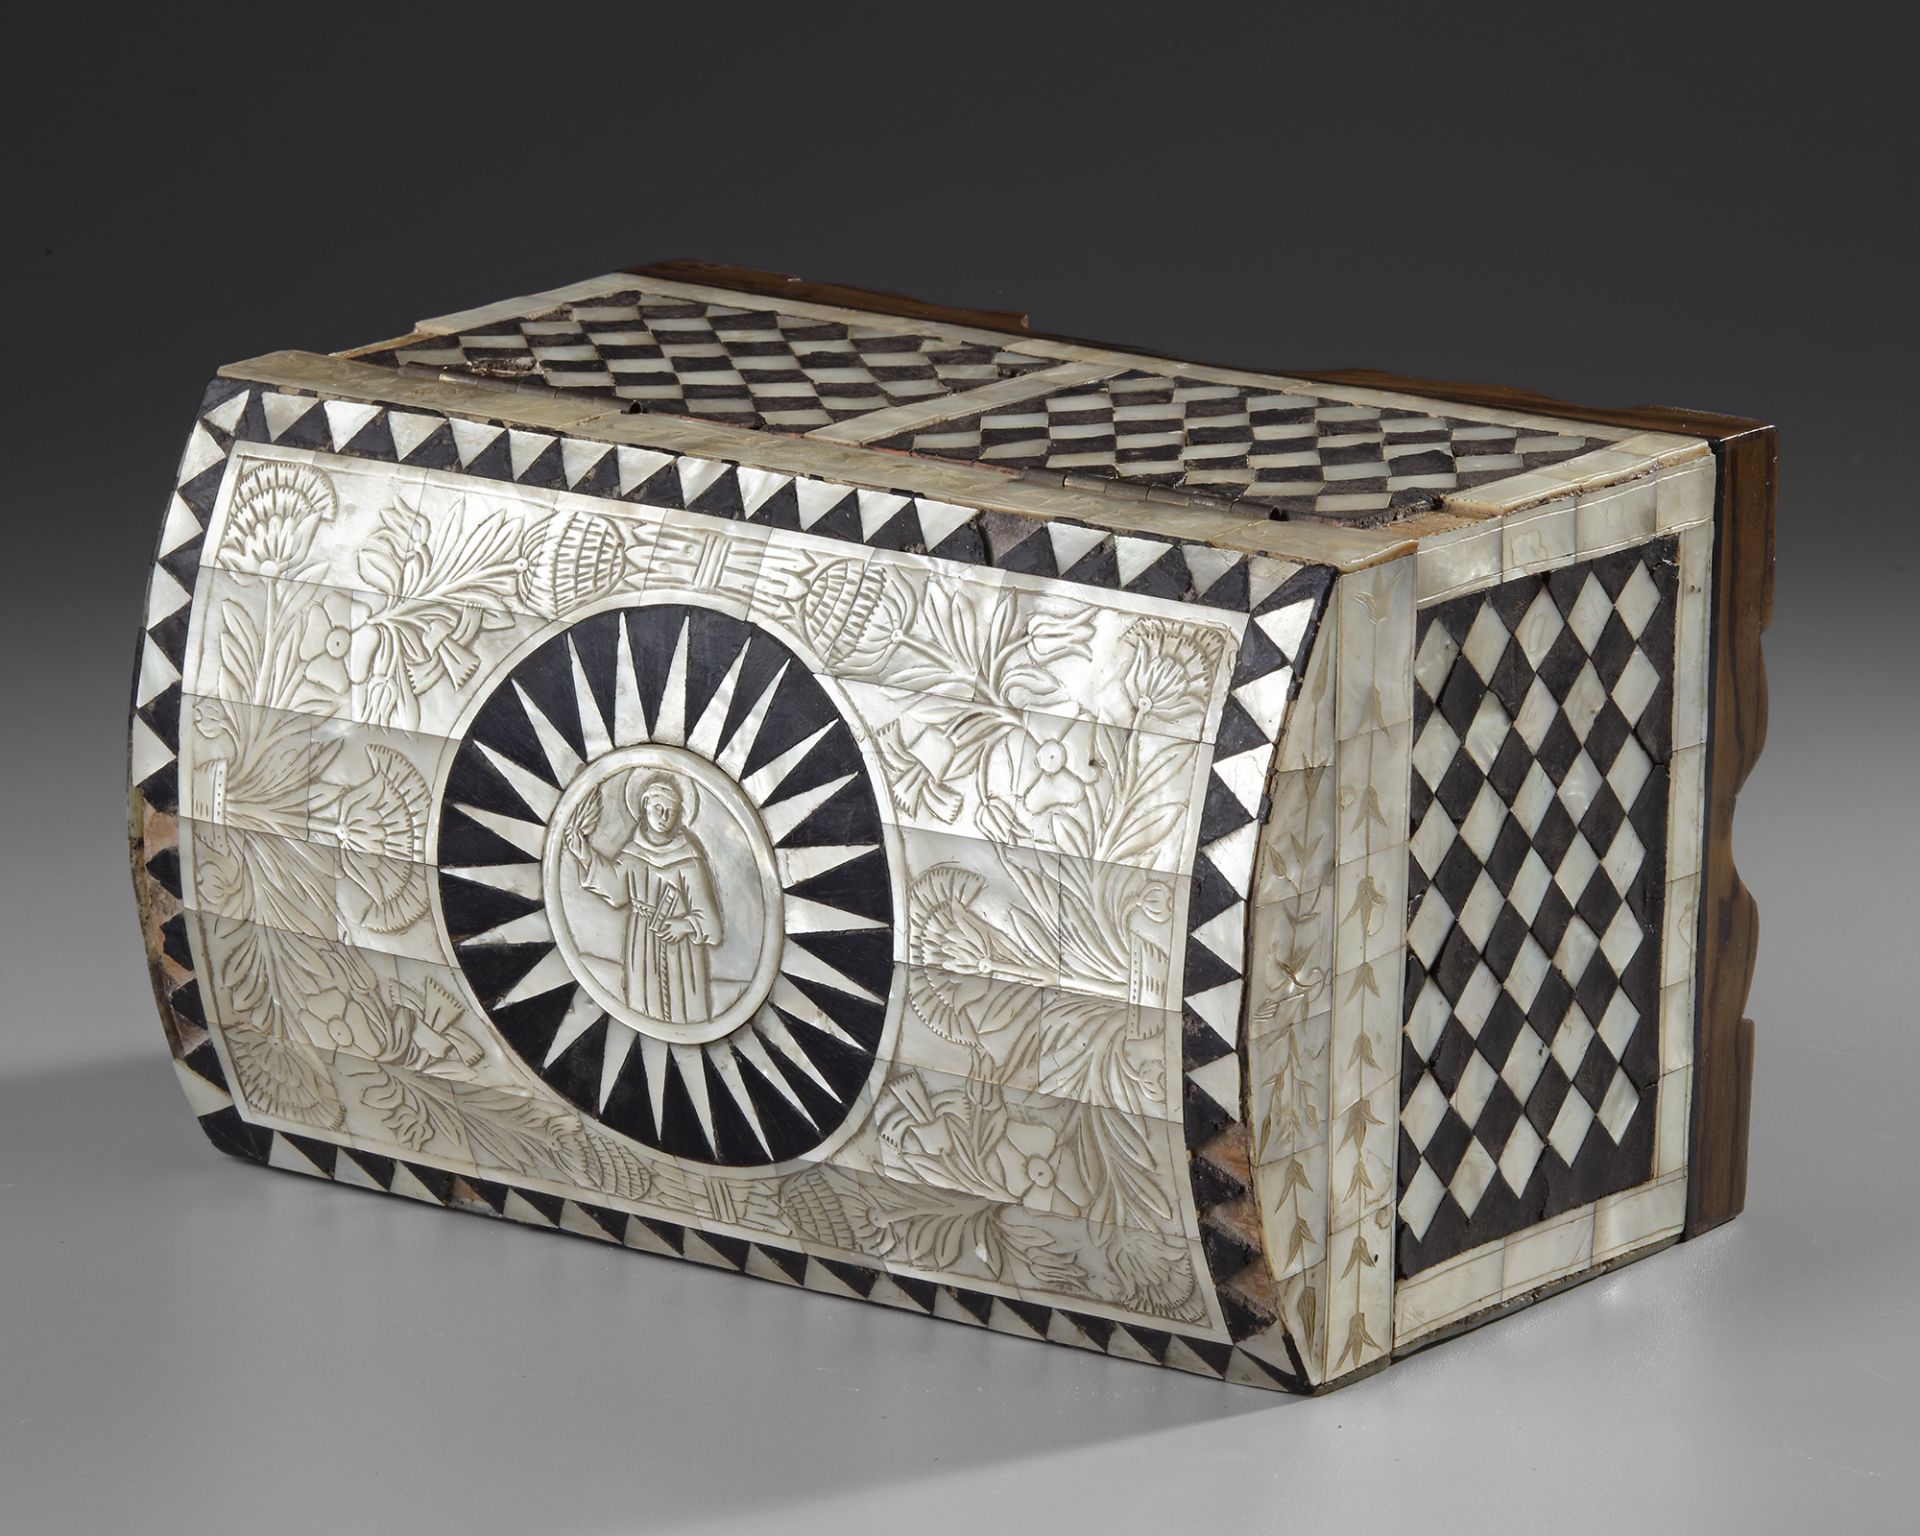 AN OTTOMAN MOTHER OF PEARL INLAID WOODEN BOX, TURKEY PROVINCES, 19TH CENTURY - Image 5 of 5